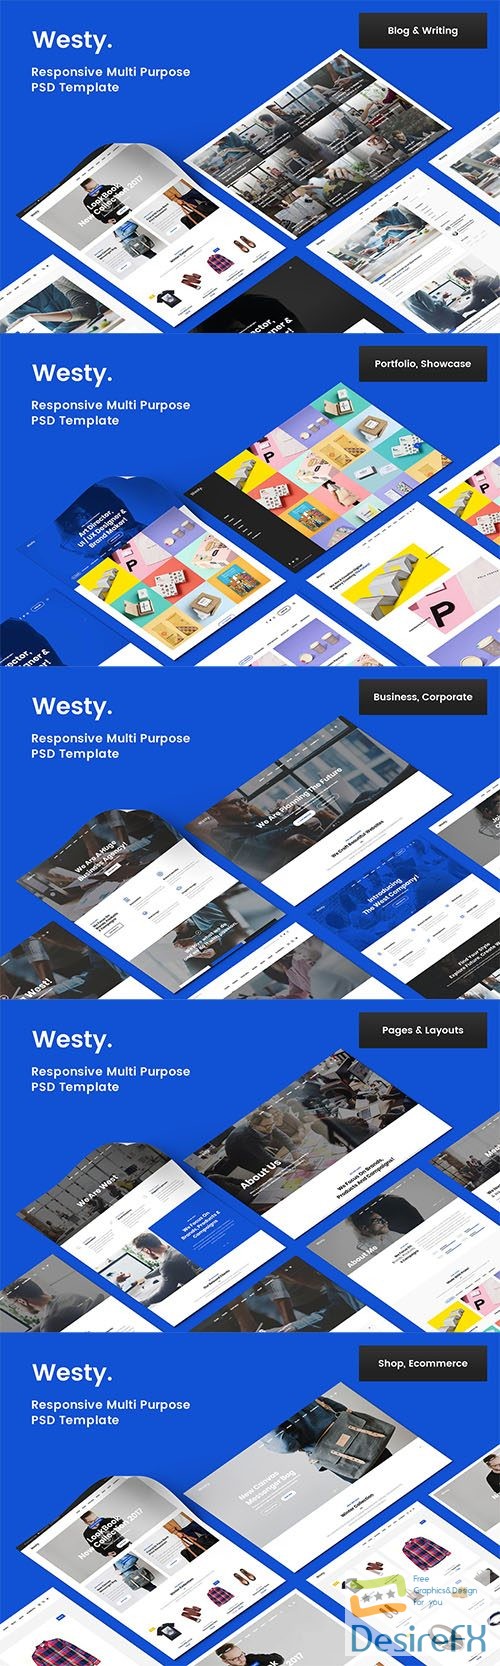 Westy Business PSD Templates